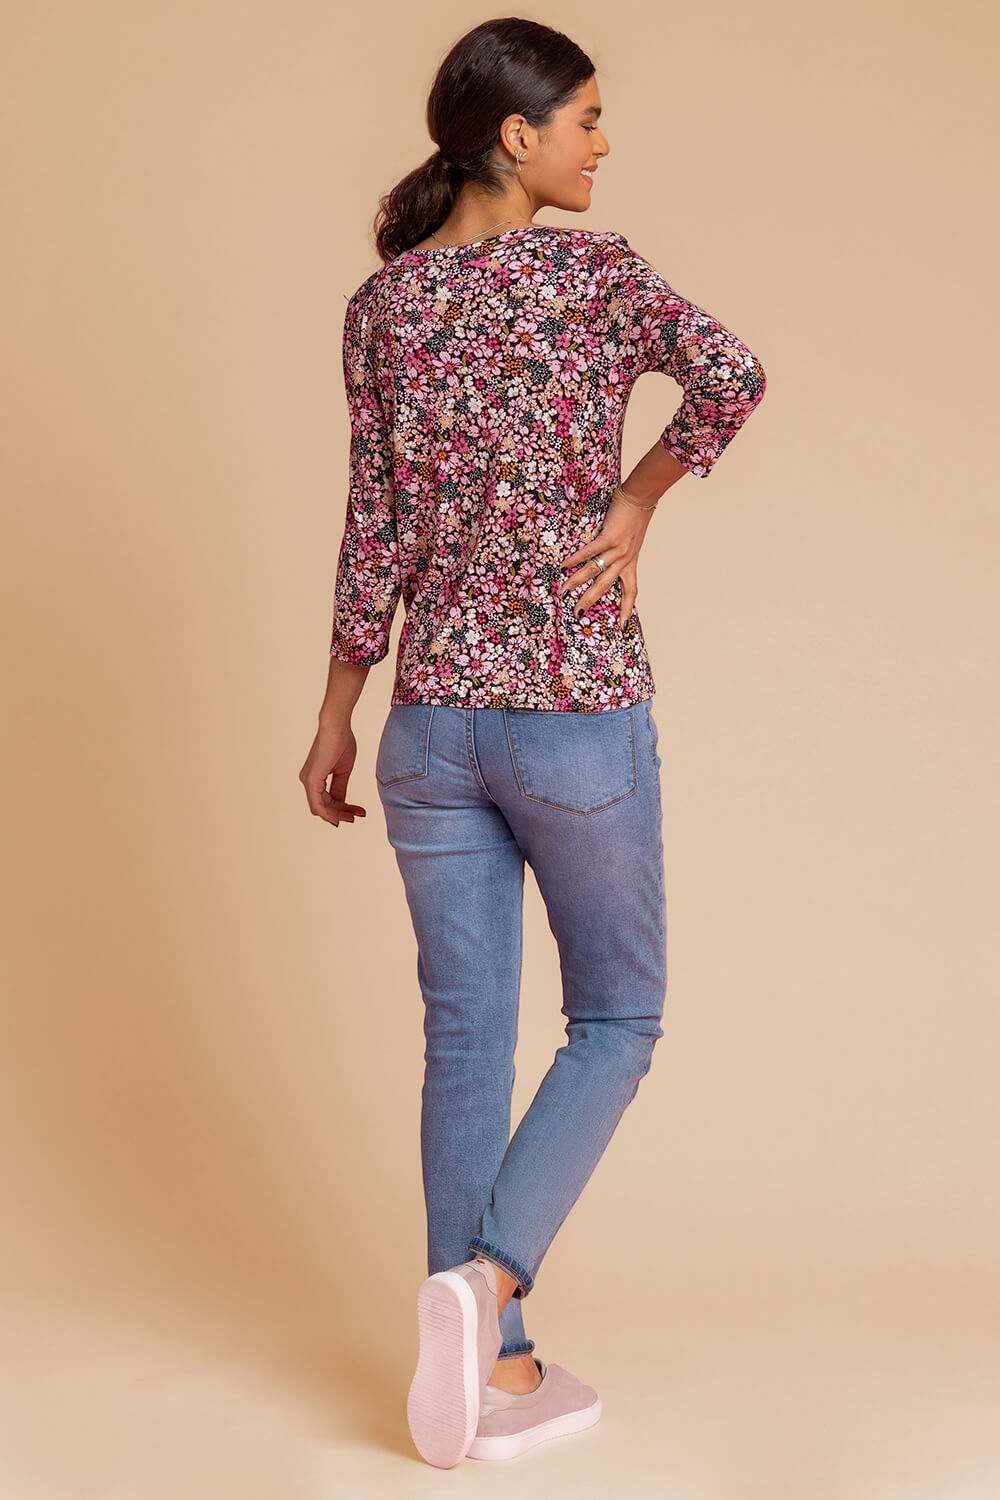 PINK Ditsy Floral Print Jersey Top, Image 2 of 4